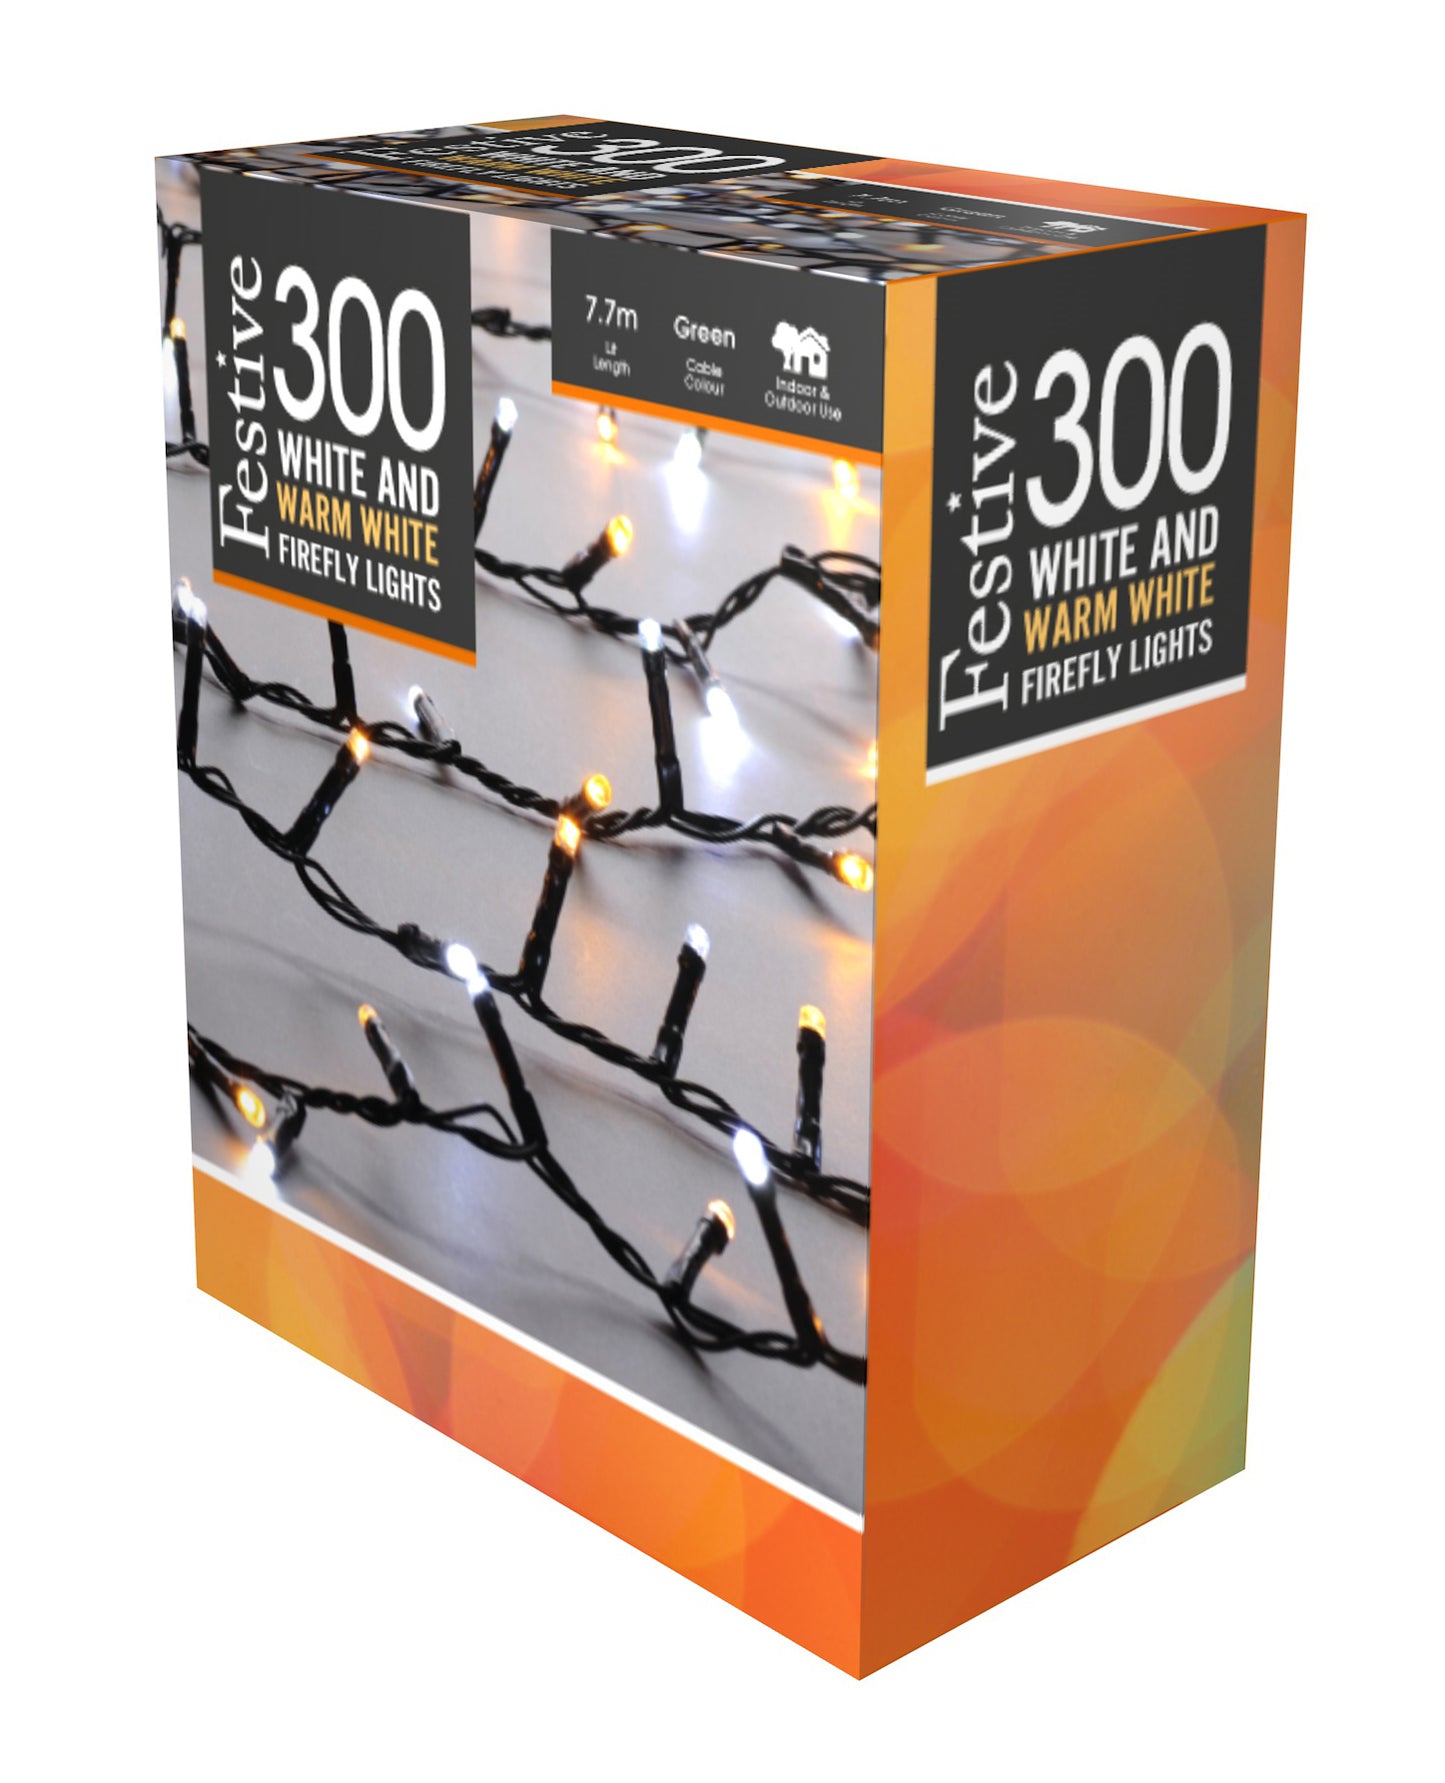 Festive 300 White and Warm White Firefly Lights